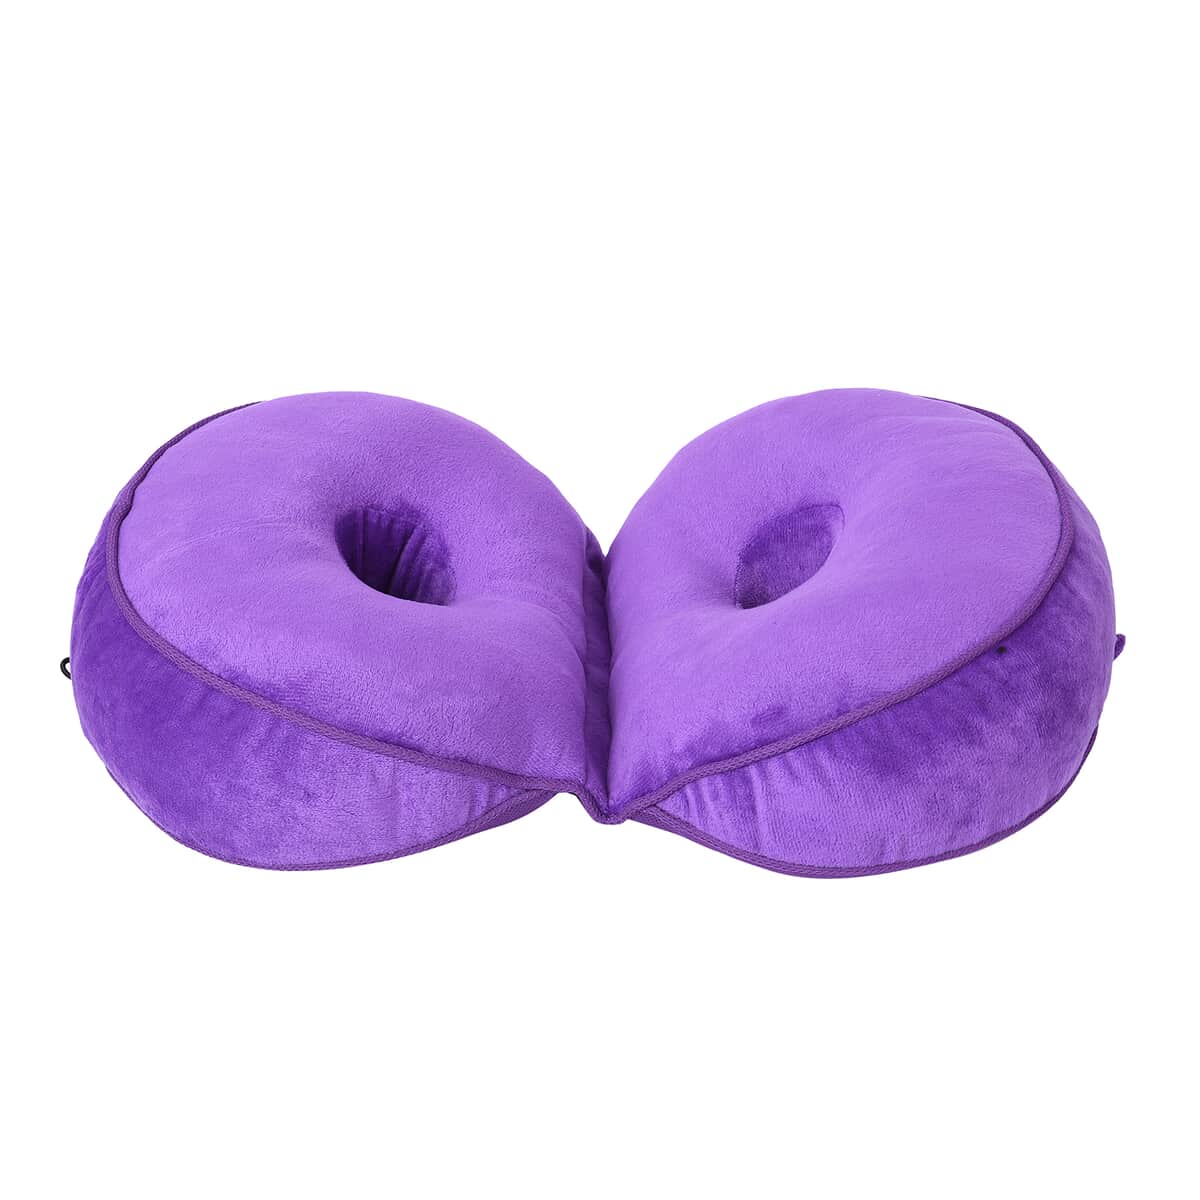 Lavender Memory Foam Seat Duo Cushion with Polyester Cover image number 1